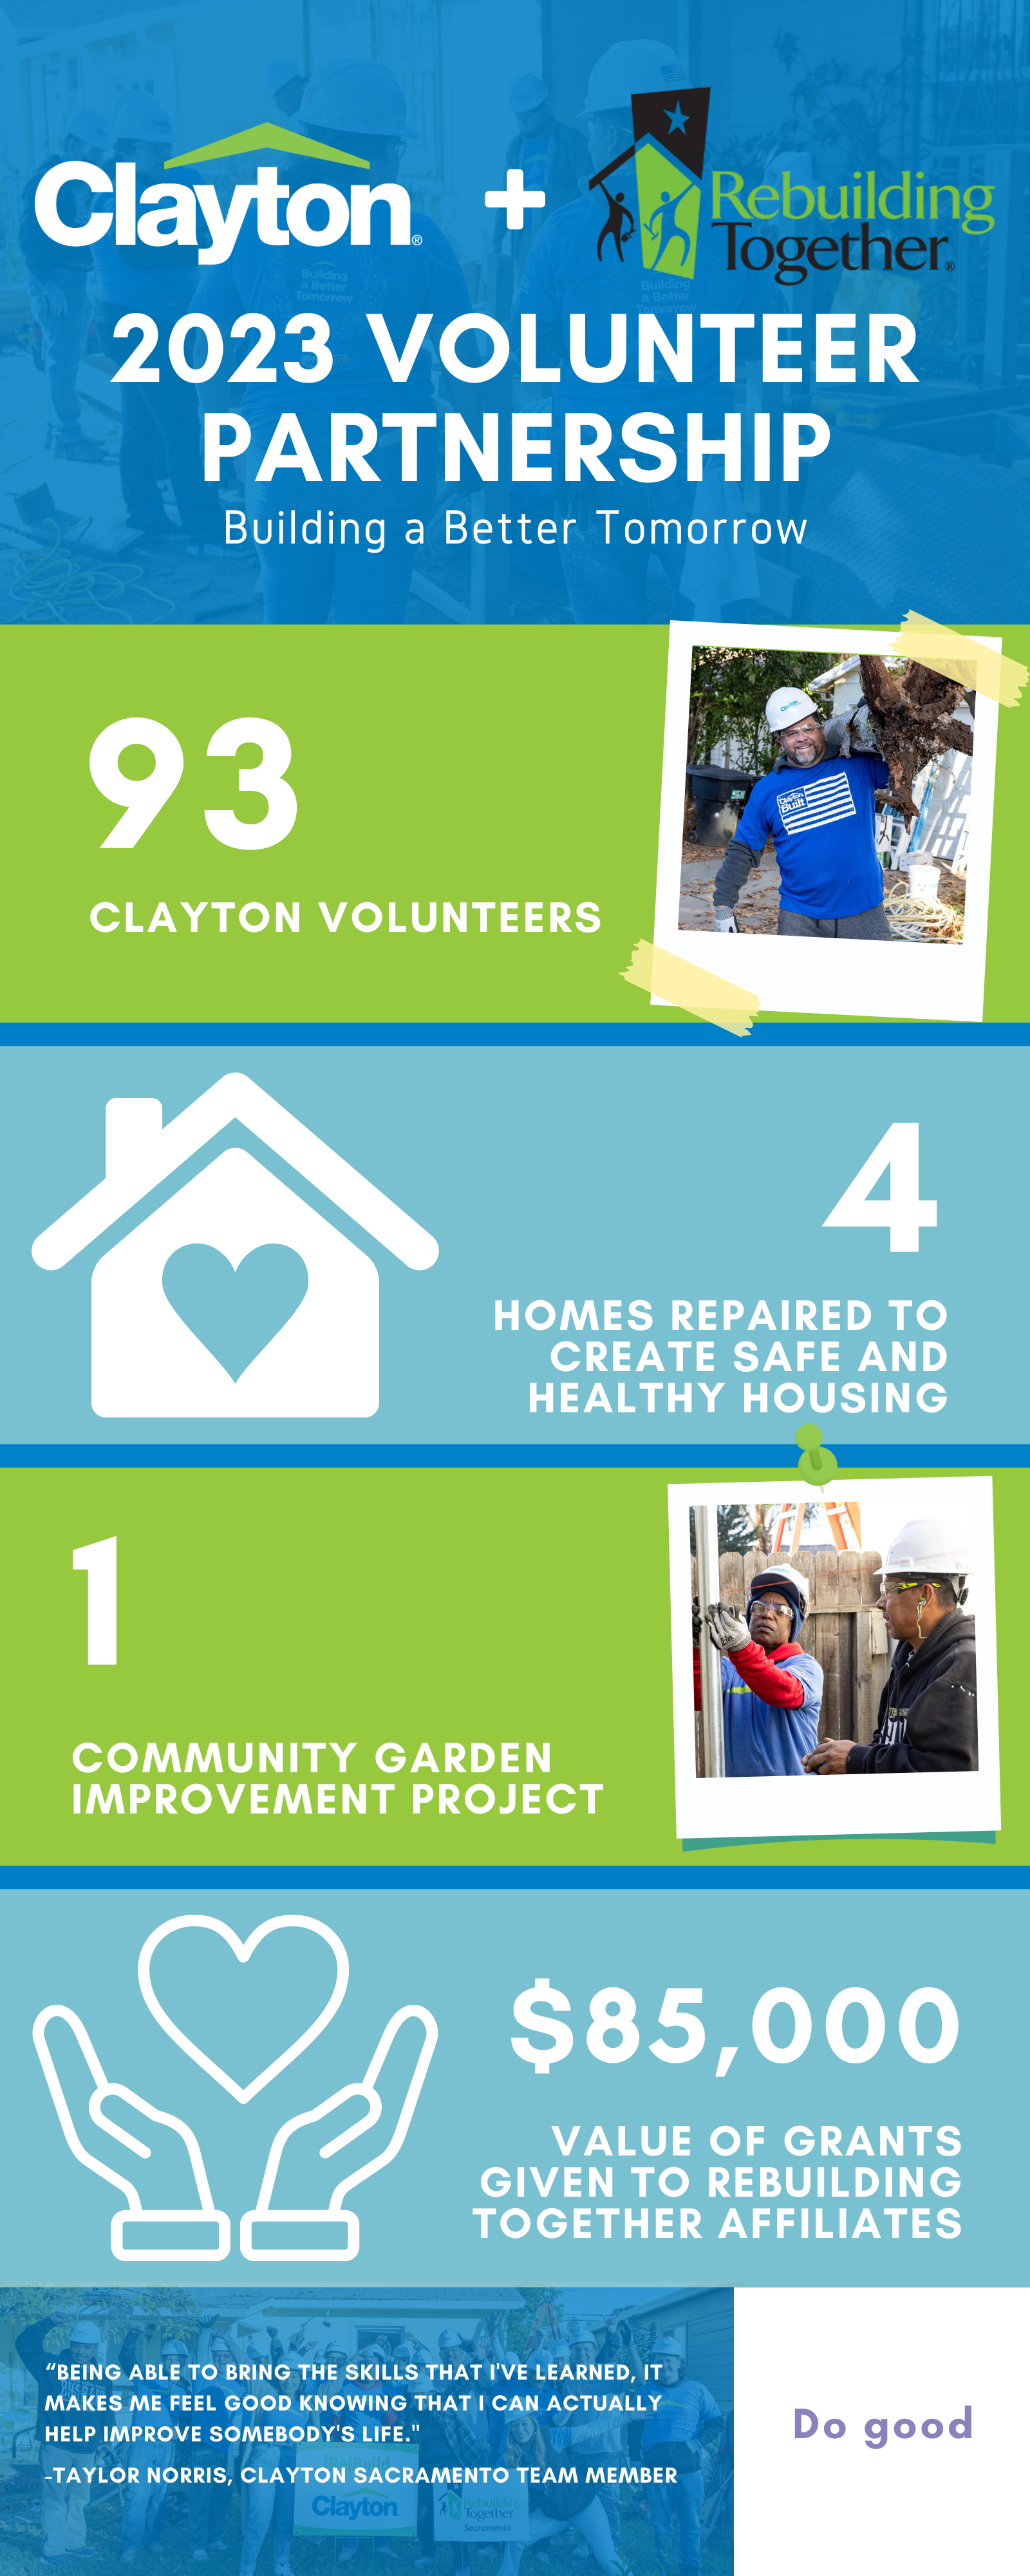 Clayton and Rebuilding Together partnered this year to uplift communities and support neighbors in need through several projects throughout the Southwest.